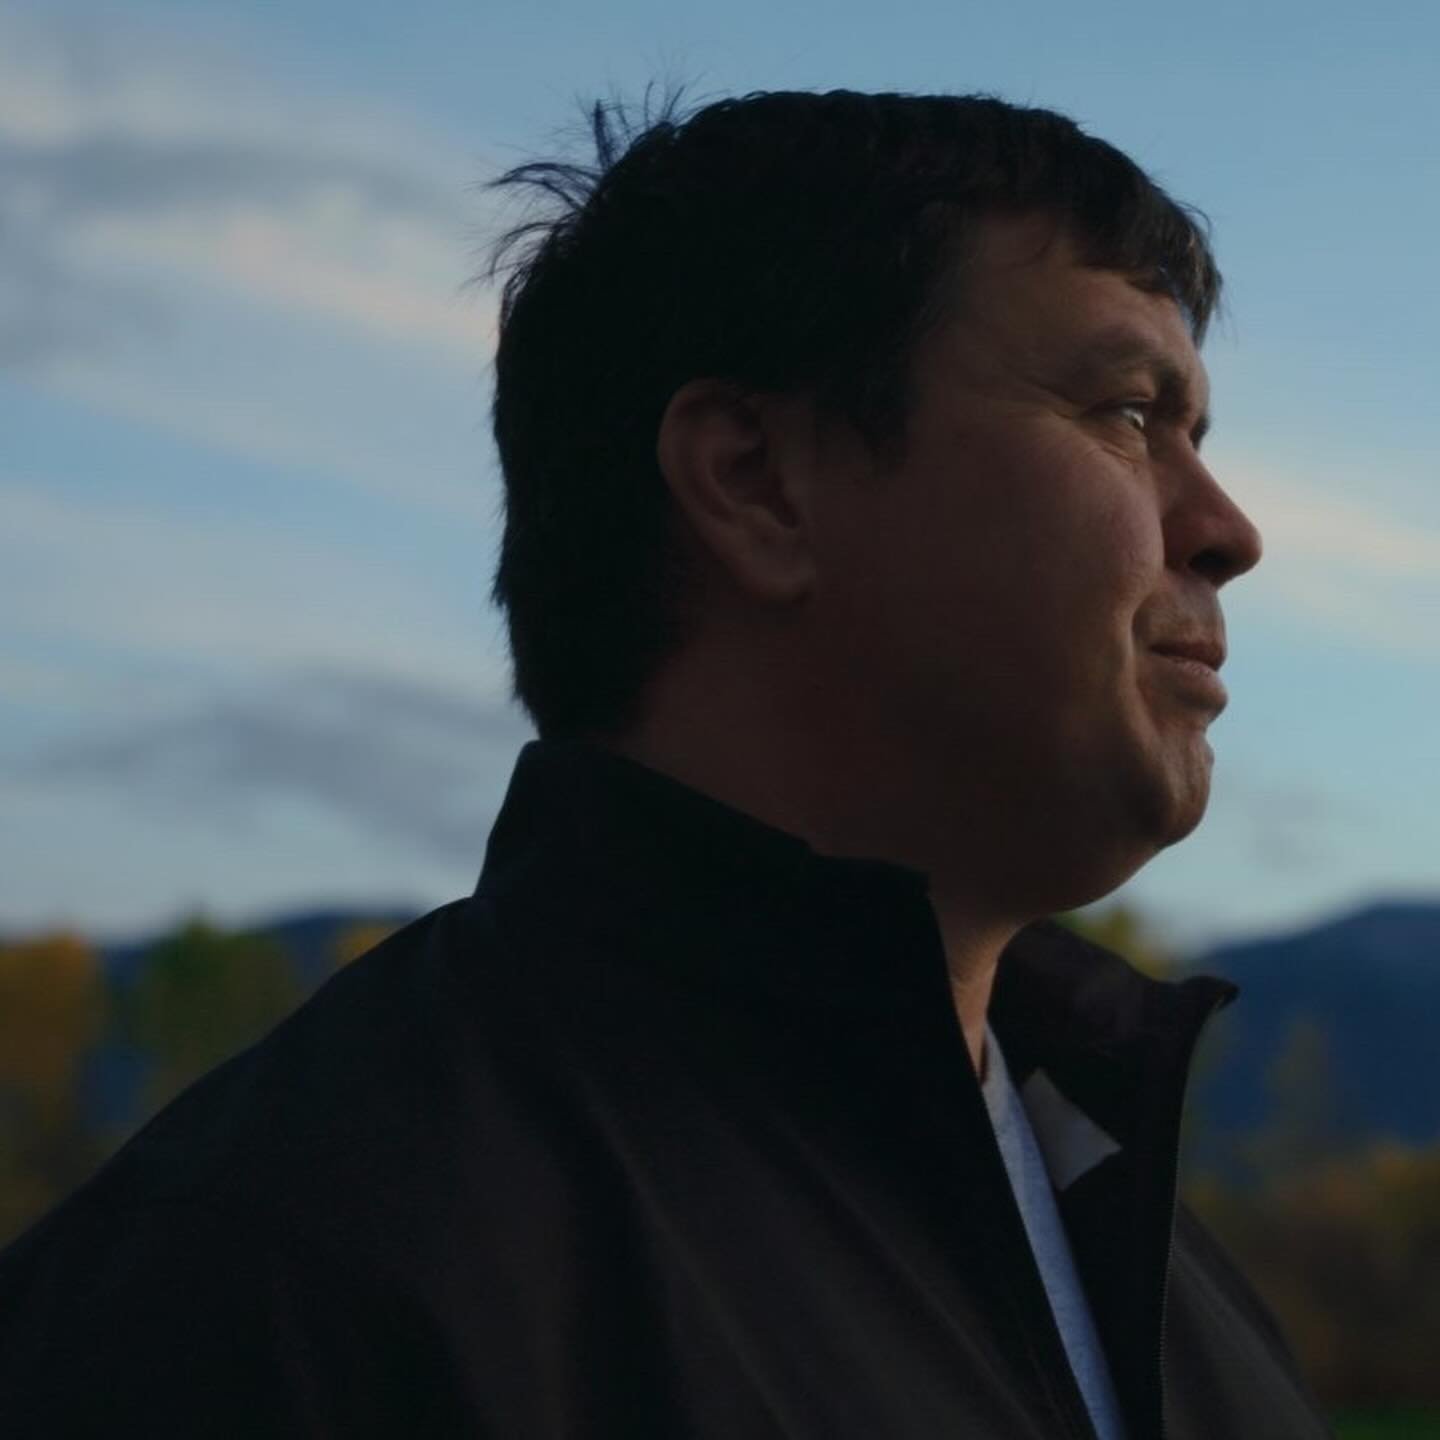 At DOXA, Tea Creek explores a farmer&rsquo;s push for Indigenous food sovereignty

Documentary film shares the story of Jacob Beaton, who is training Indigenous people to grow their own food. 

Head to Stir to read more. 

#yvrarts #vancouverarts #do